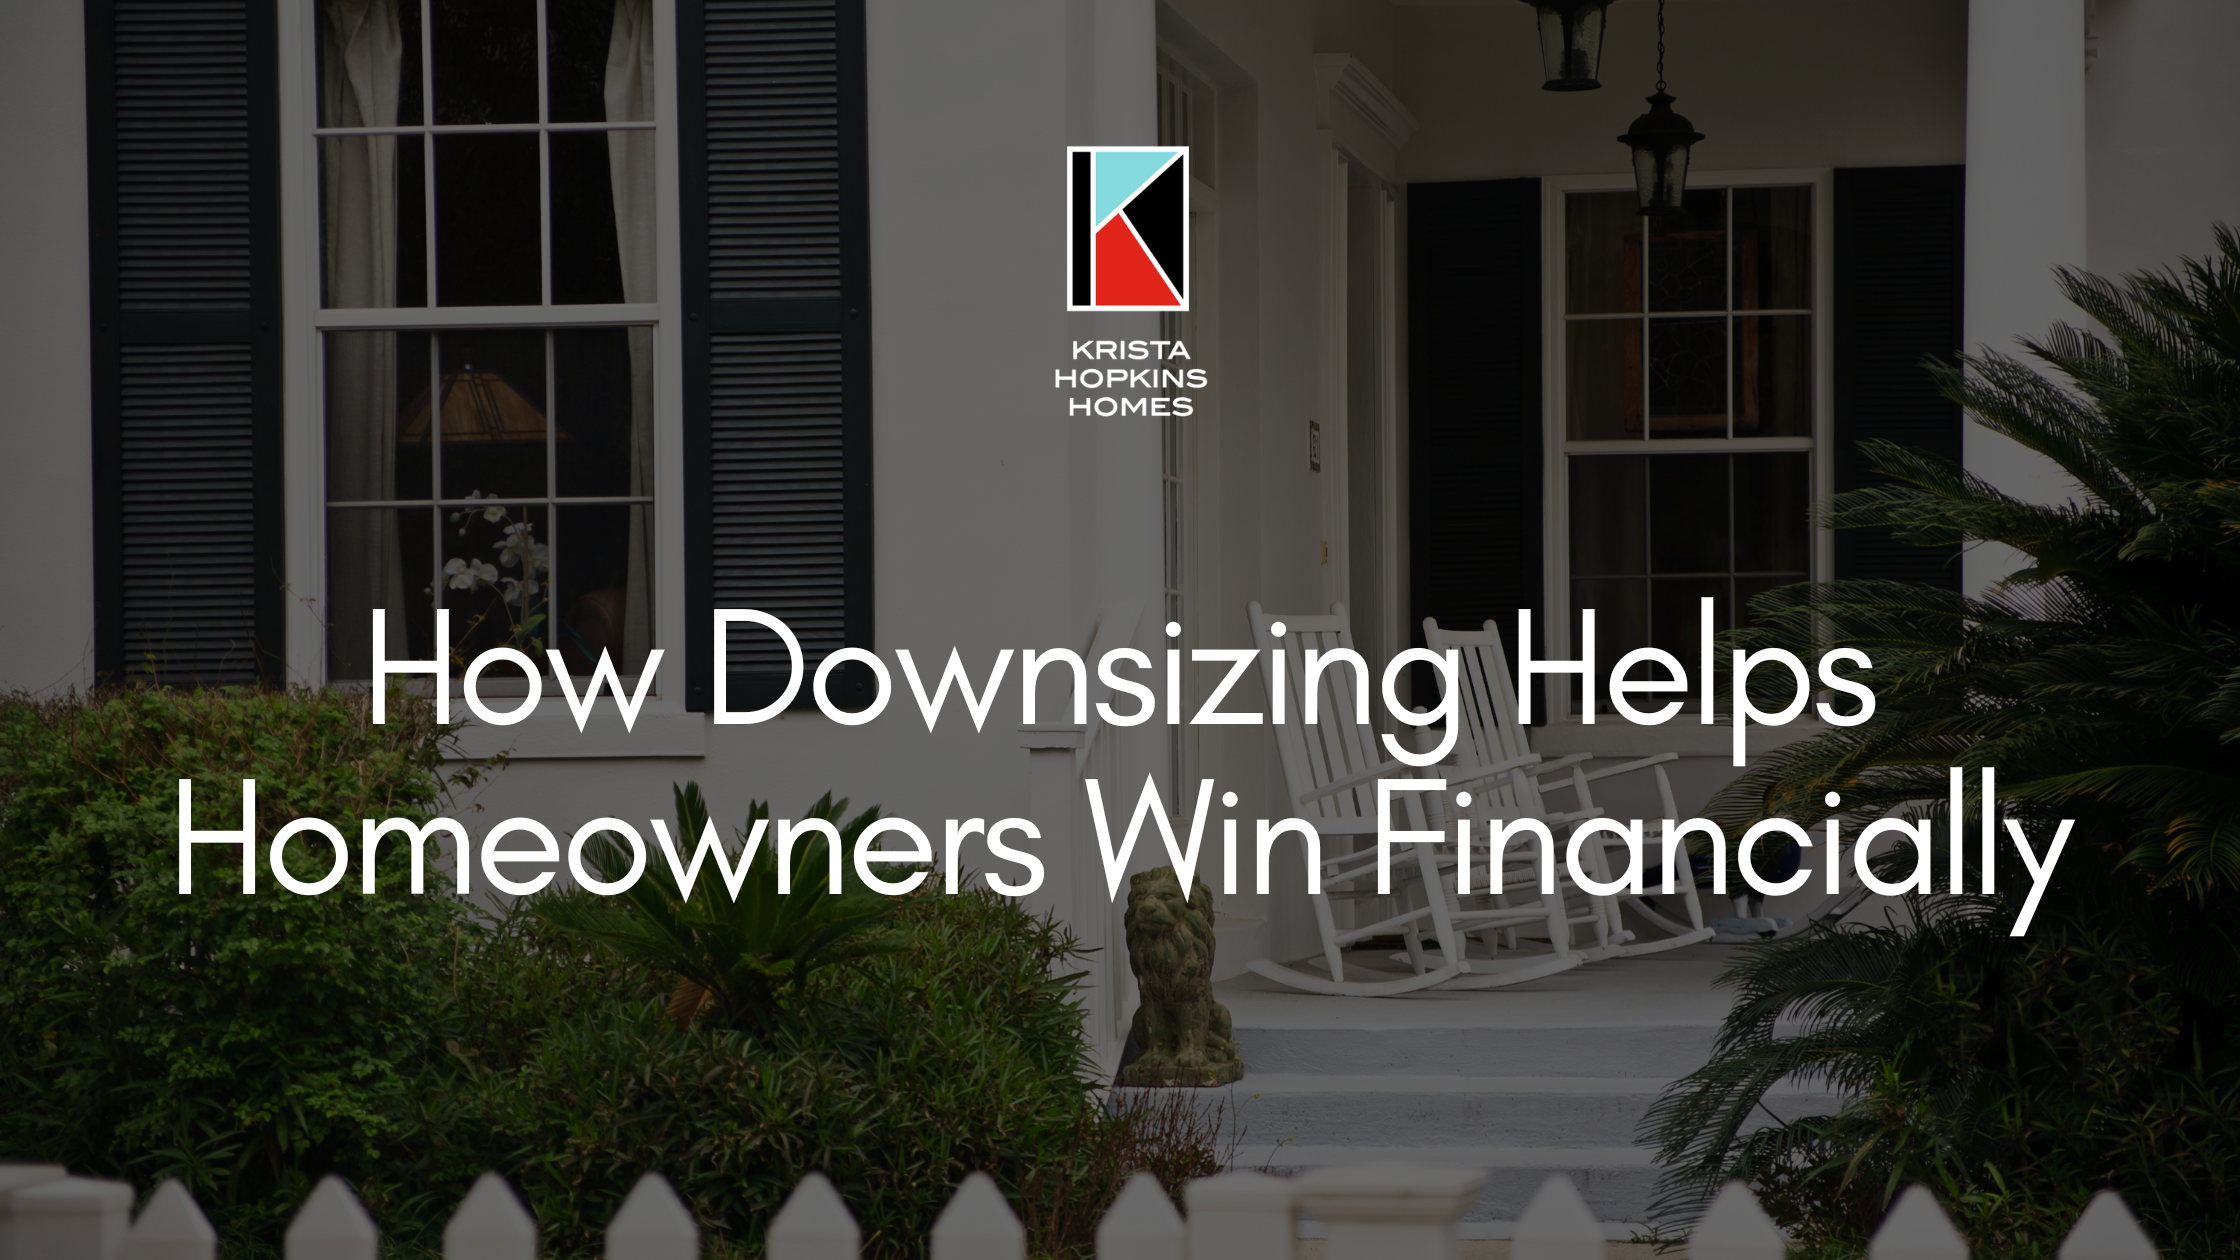 Photo of front porch of a home with the Krista Hopkins Homes logo and text under that says "How Downsizing Helps Homeowners Win Financially"